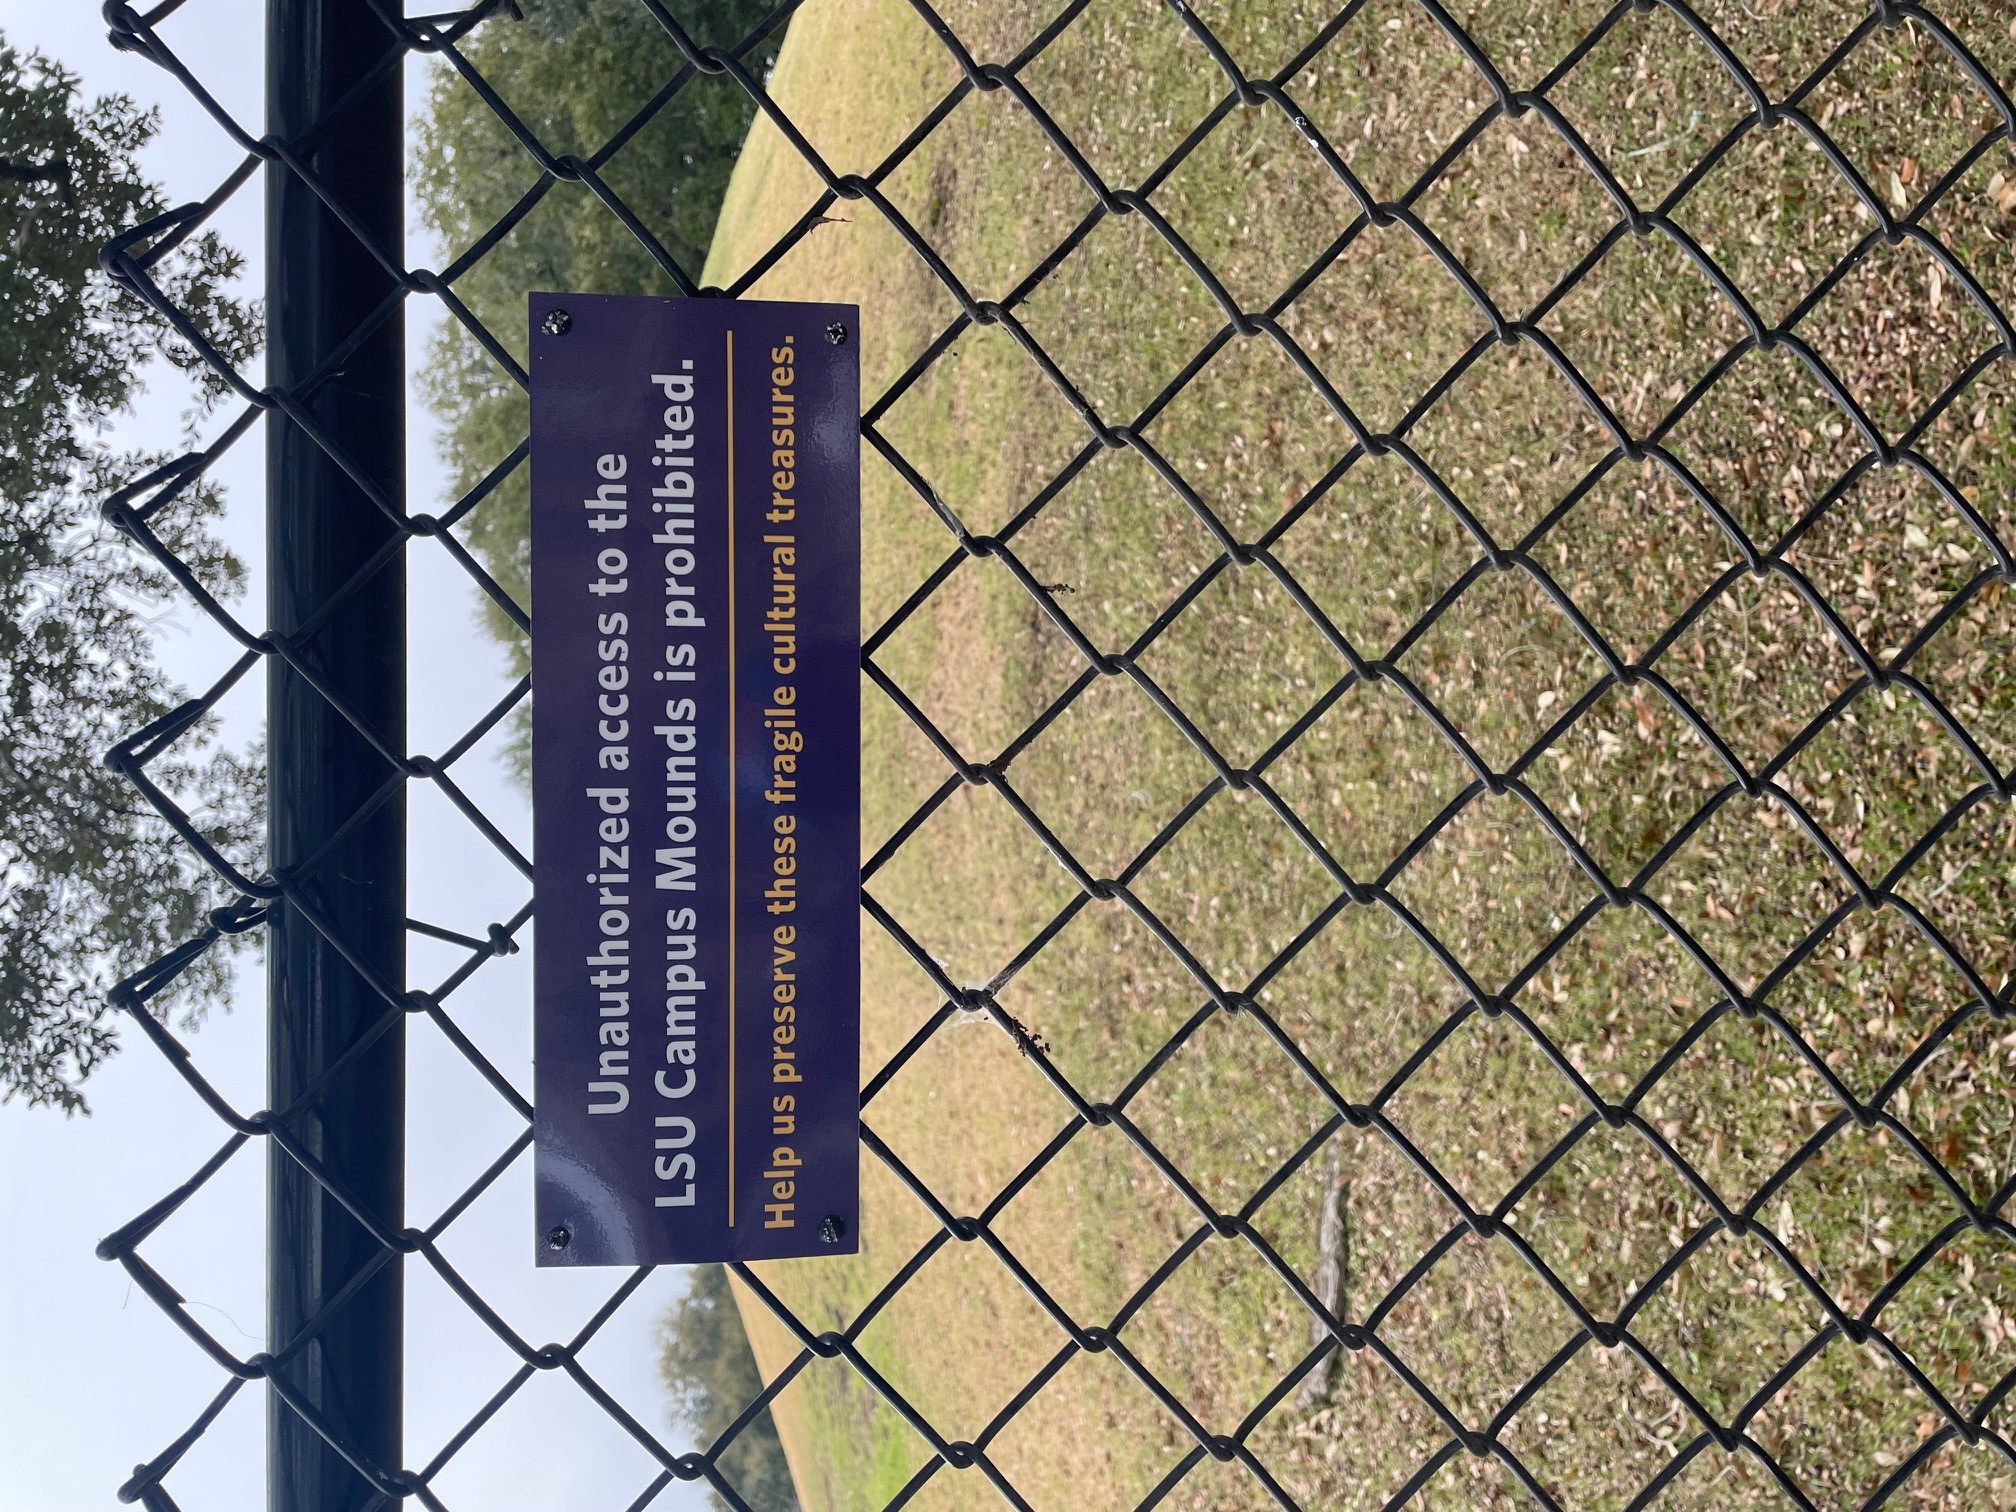 sign on fence at LSU Campus Mounds warns against unauthorized access